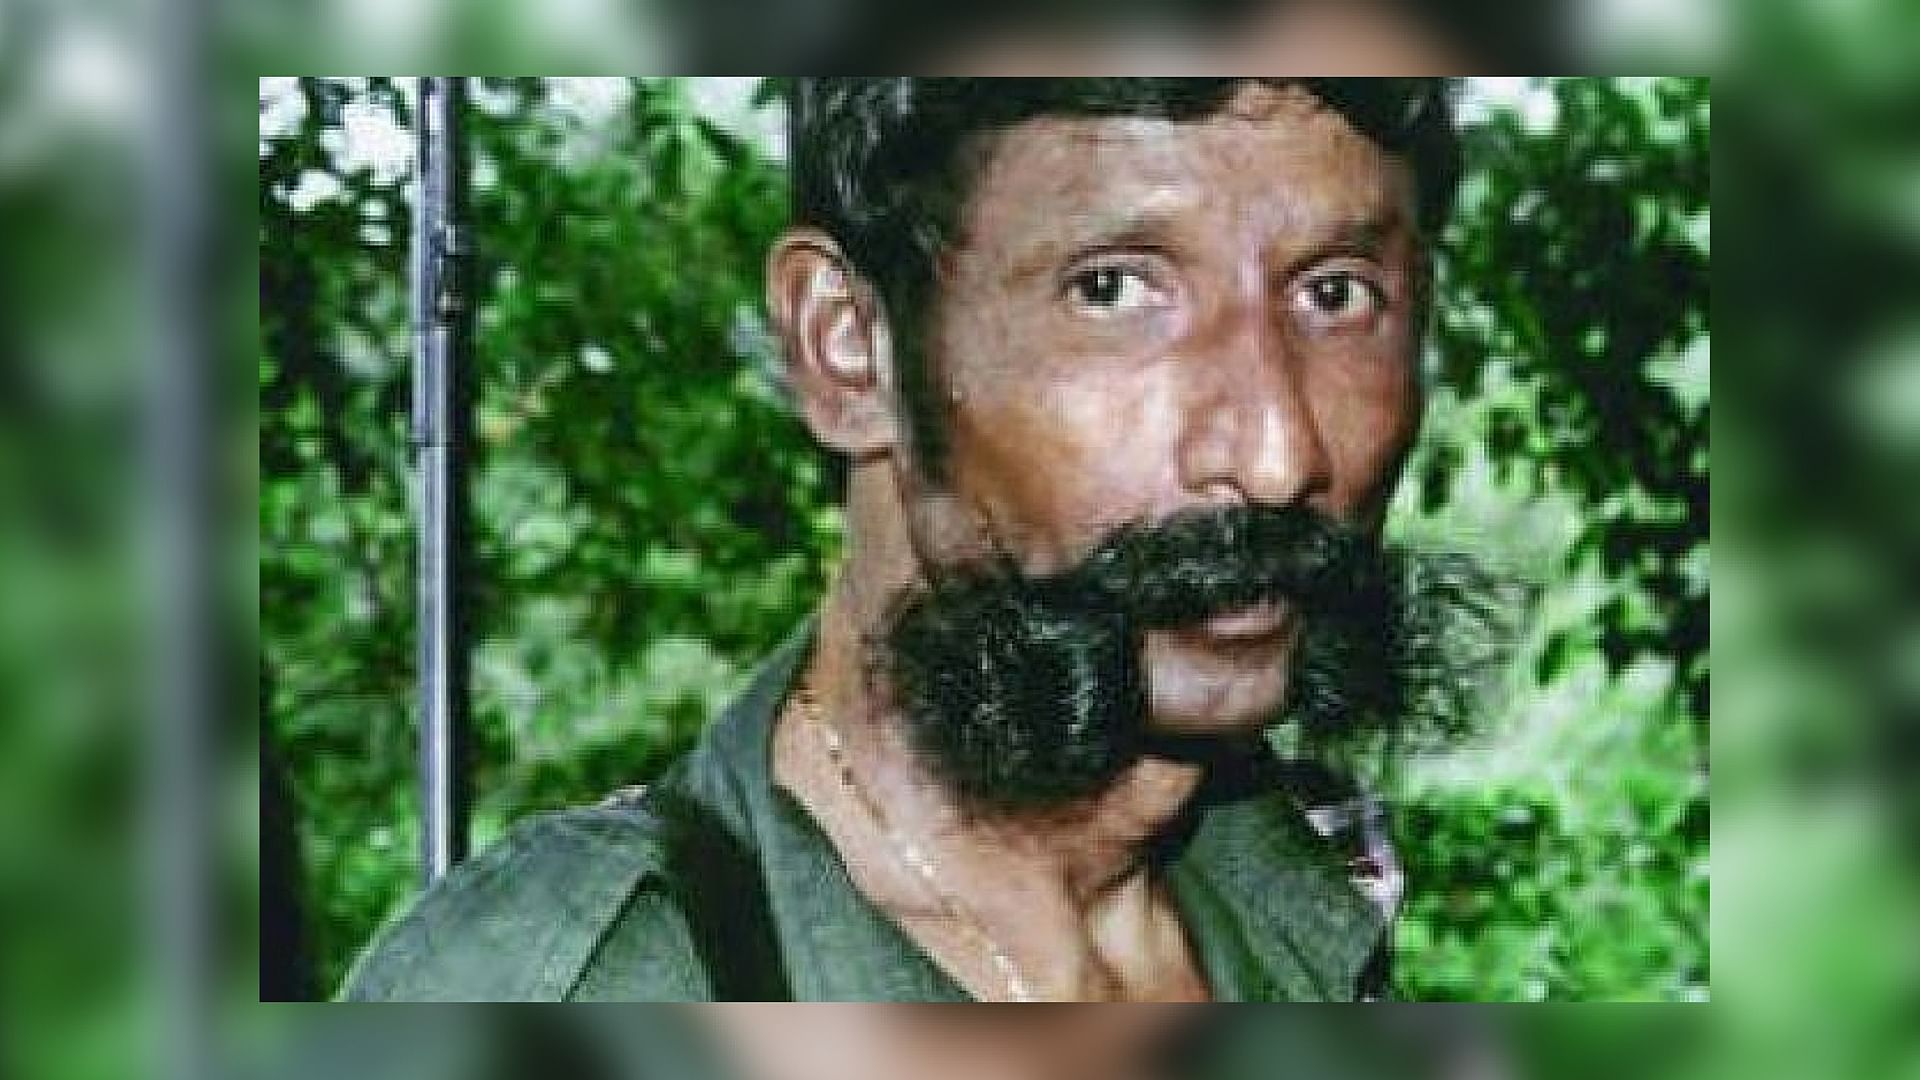 Veerappan was one of India’s most wanted criminals. (Picture Courtesy: <a href="http://www.udayavani.com/english/news/state/118727/%E2%80%8Bmuthulakshmi-gets-stay-rgv%E2%80%99s-movie-veerappan">Udayvani</a>)